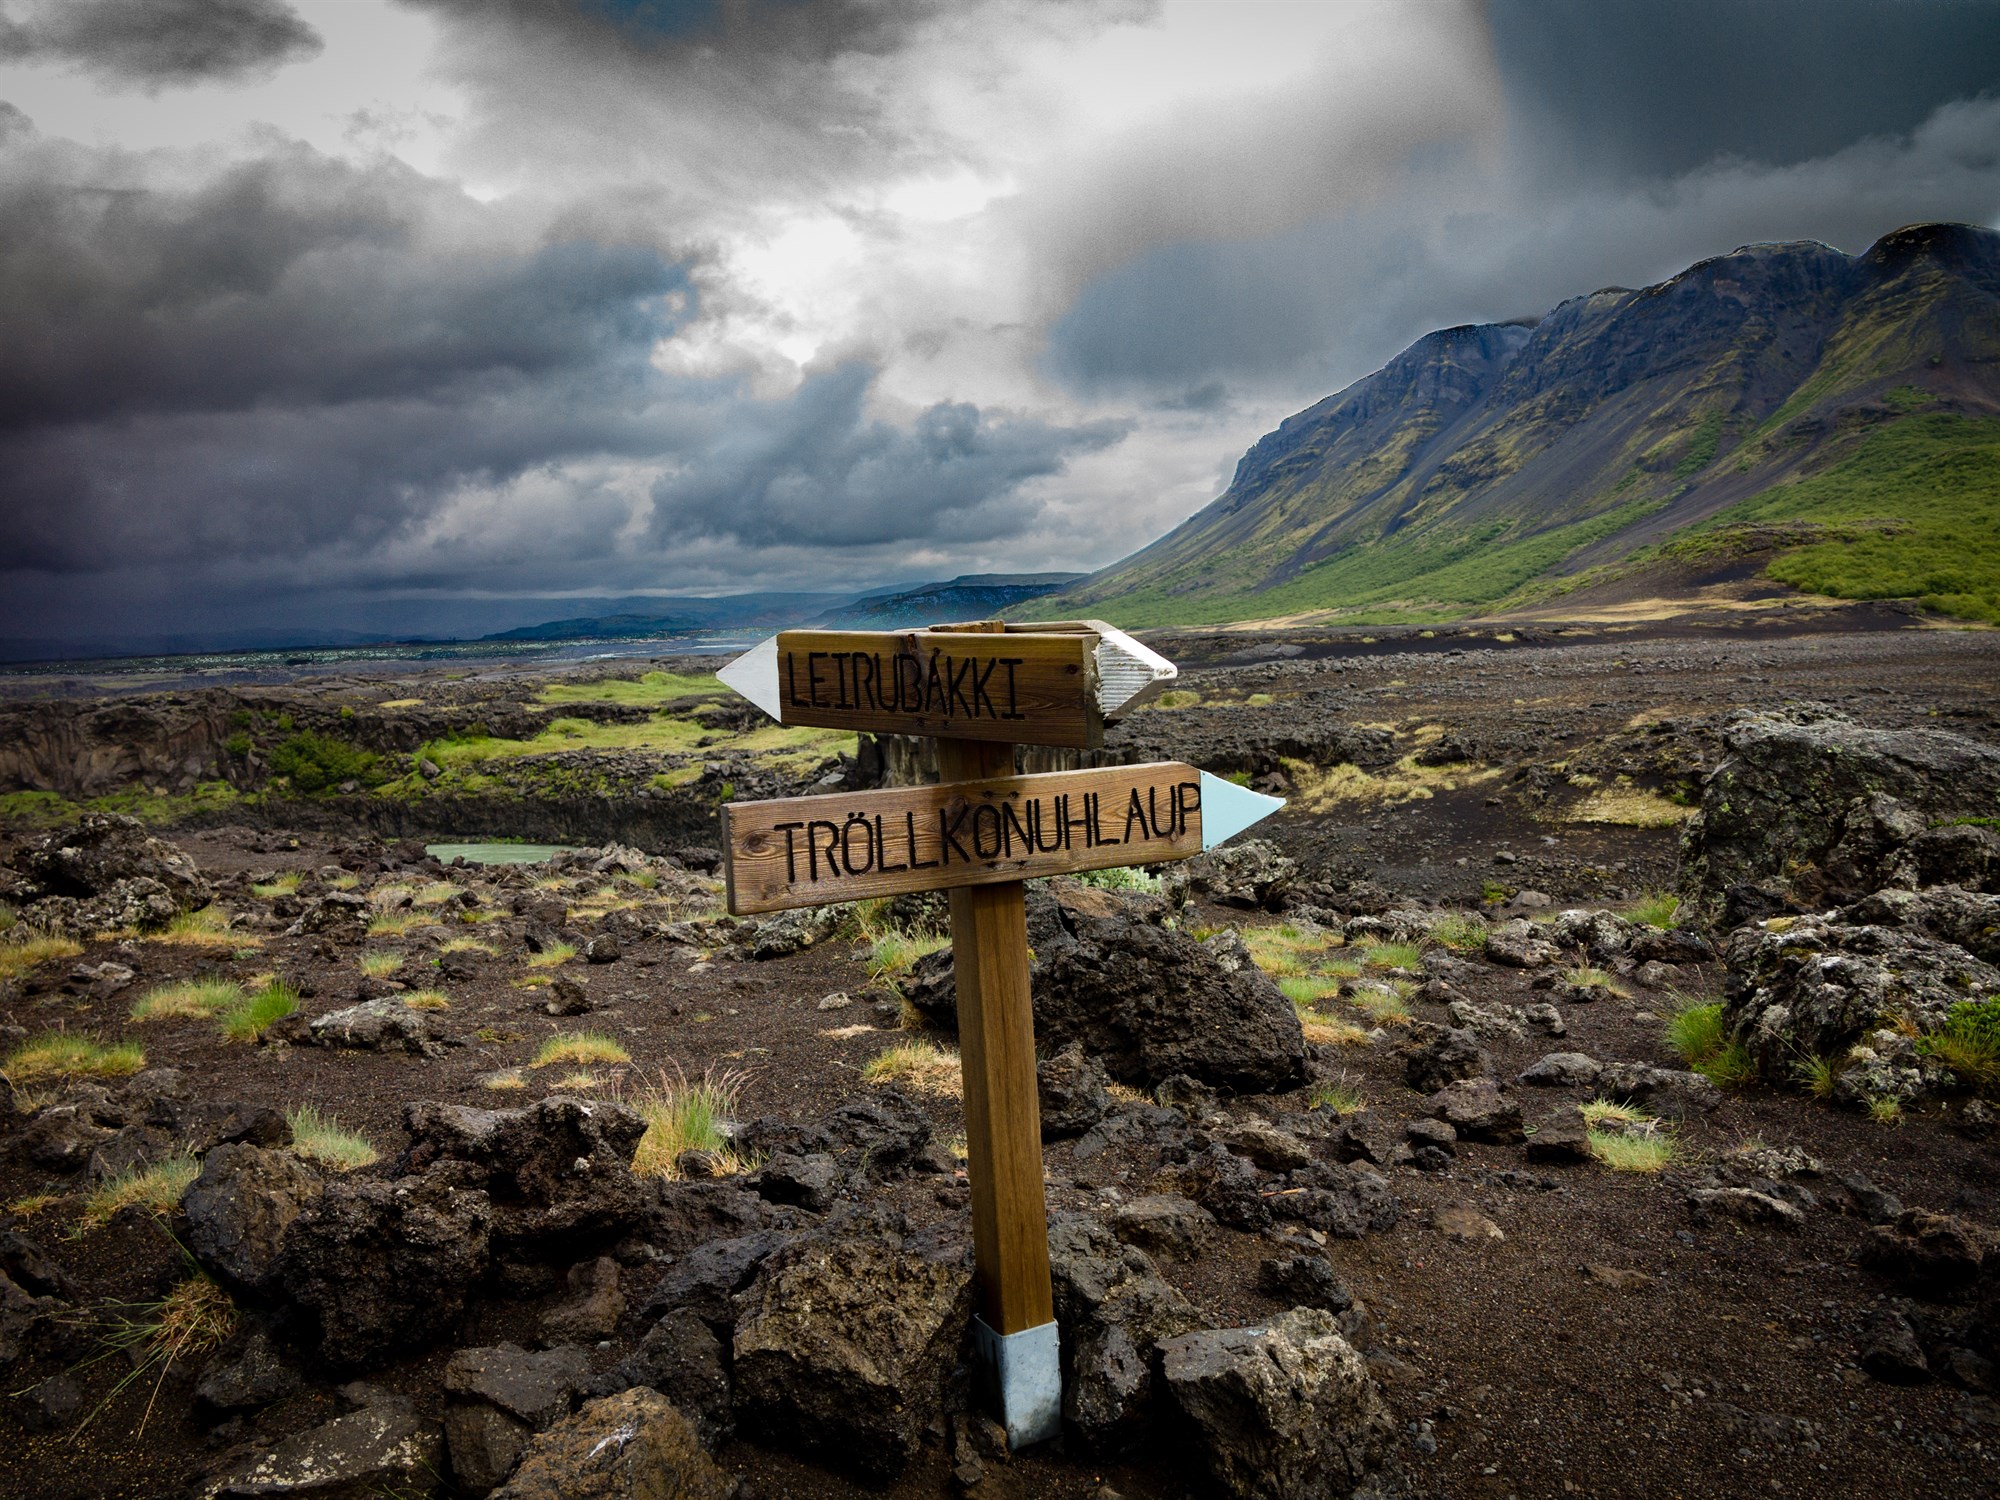 A brown wooden sign with Icelandic place names in front of a dramatic rocky landscape.